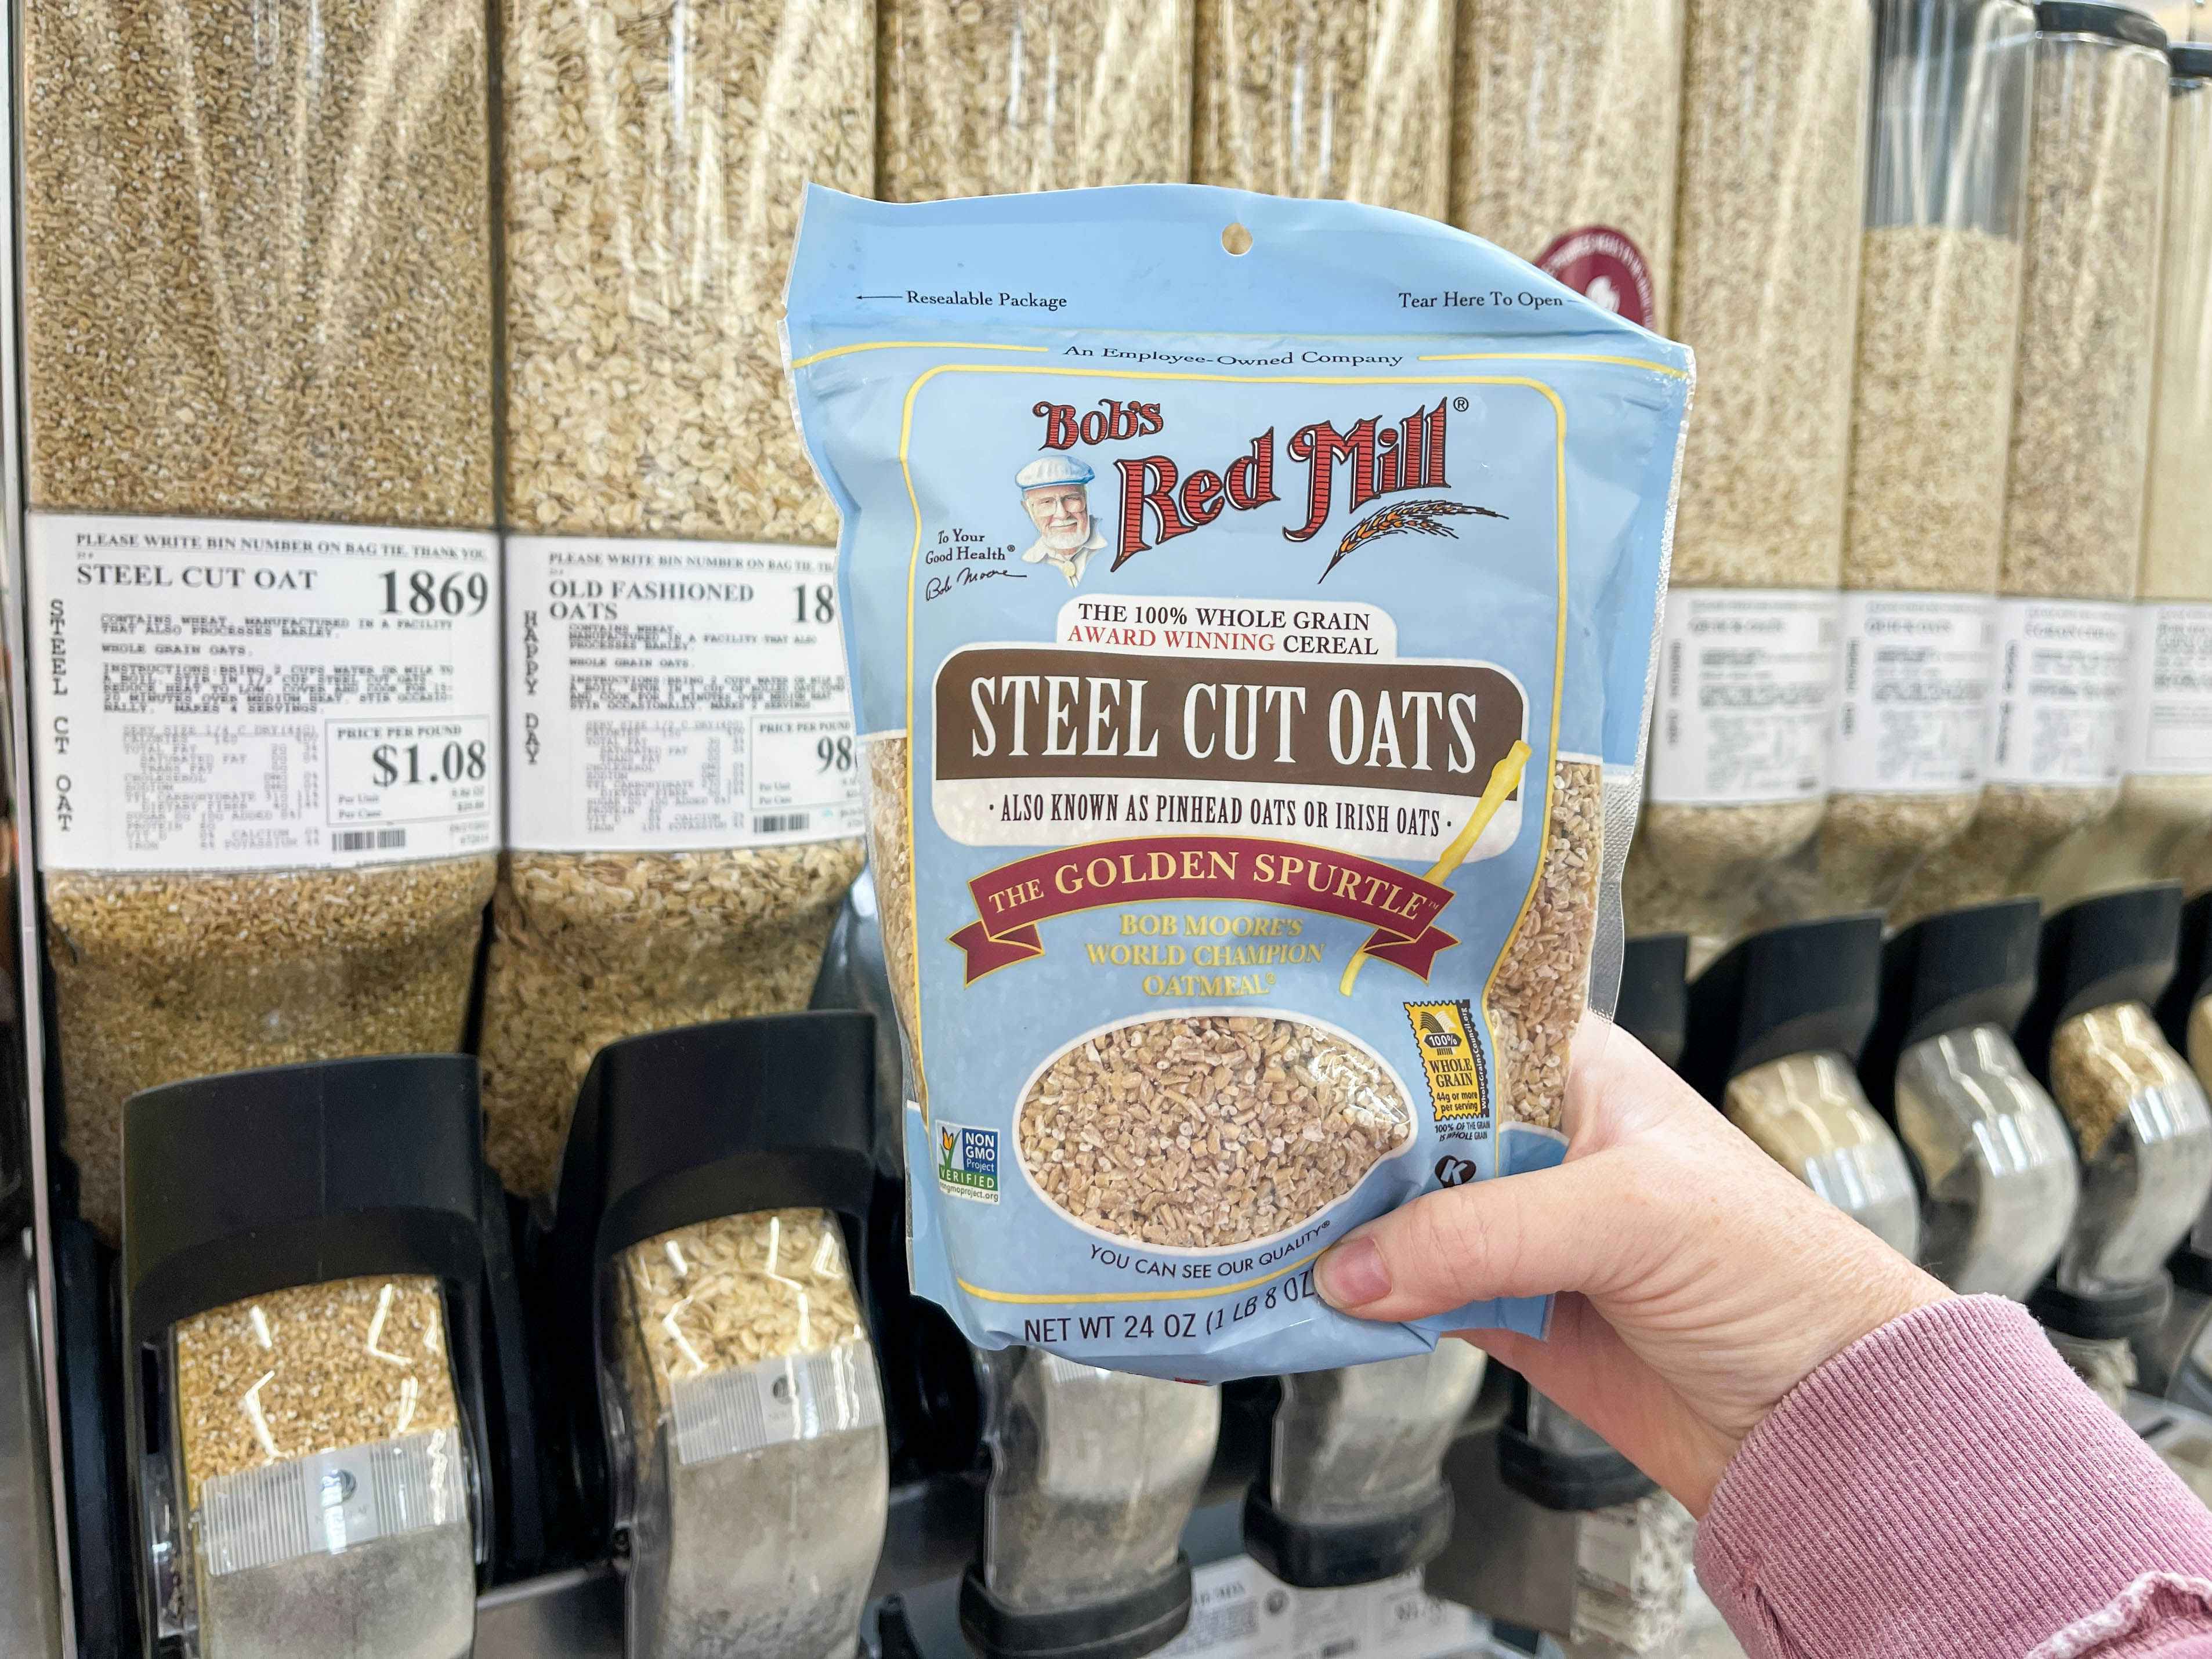 a package of steel cut oats being held in front of winco bulk foods